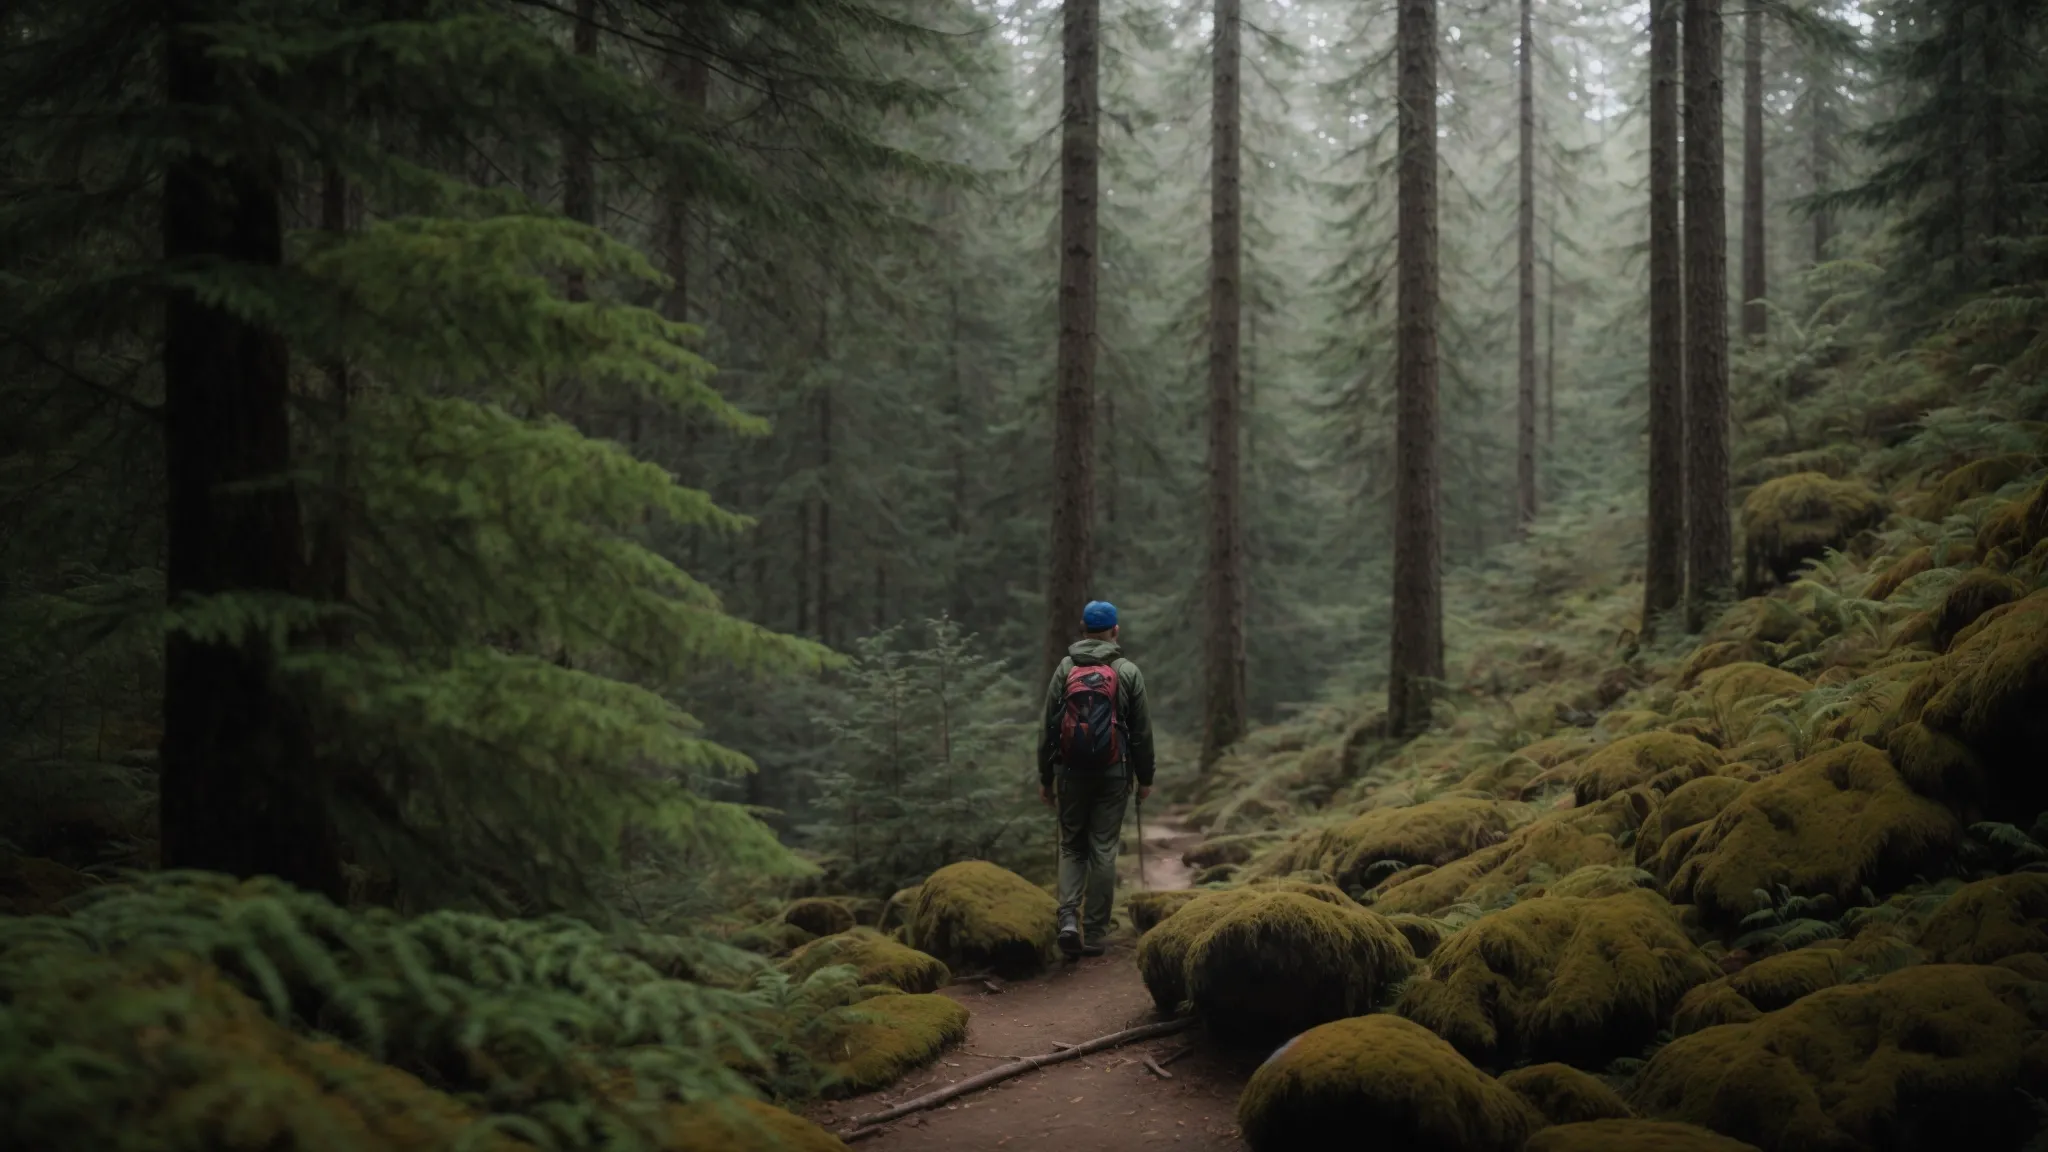 a hiker stands at the edge of a dense forest, peering into the path that disappears into the wilderness ahead.